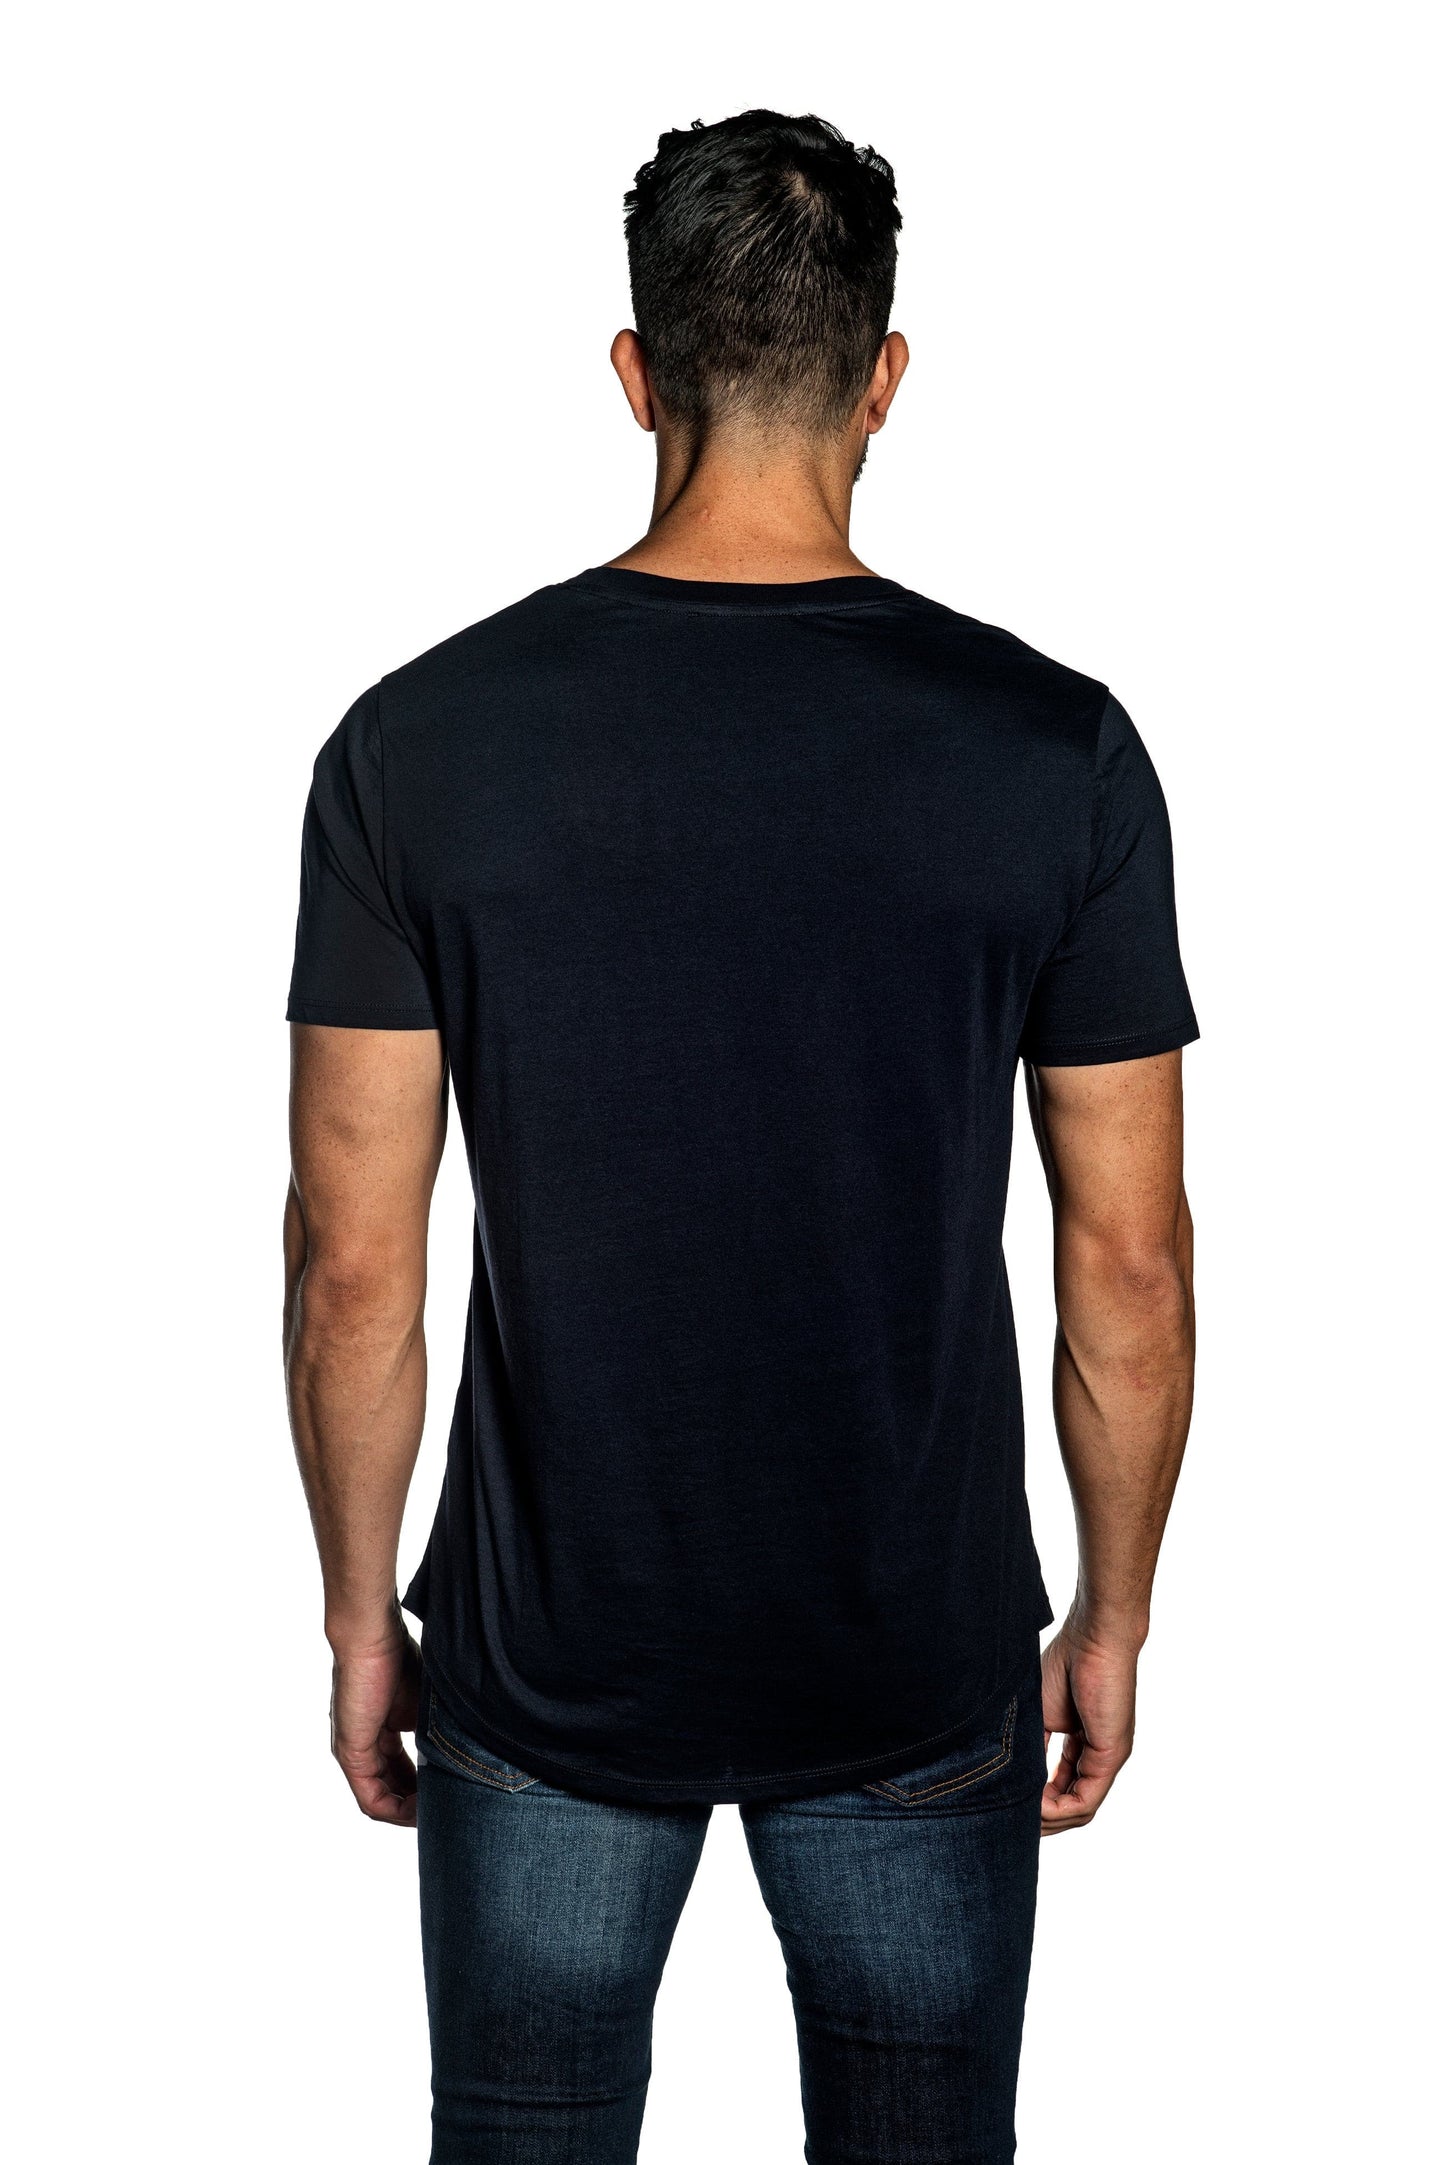 Navy Blue Mens Tee With Lightning Embroidery TEE-36.